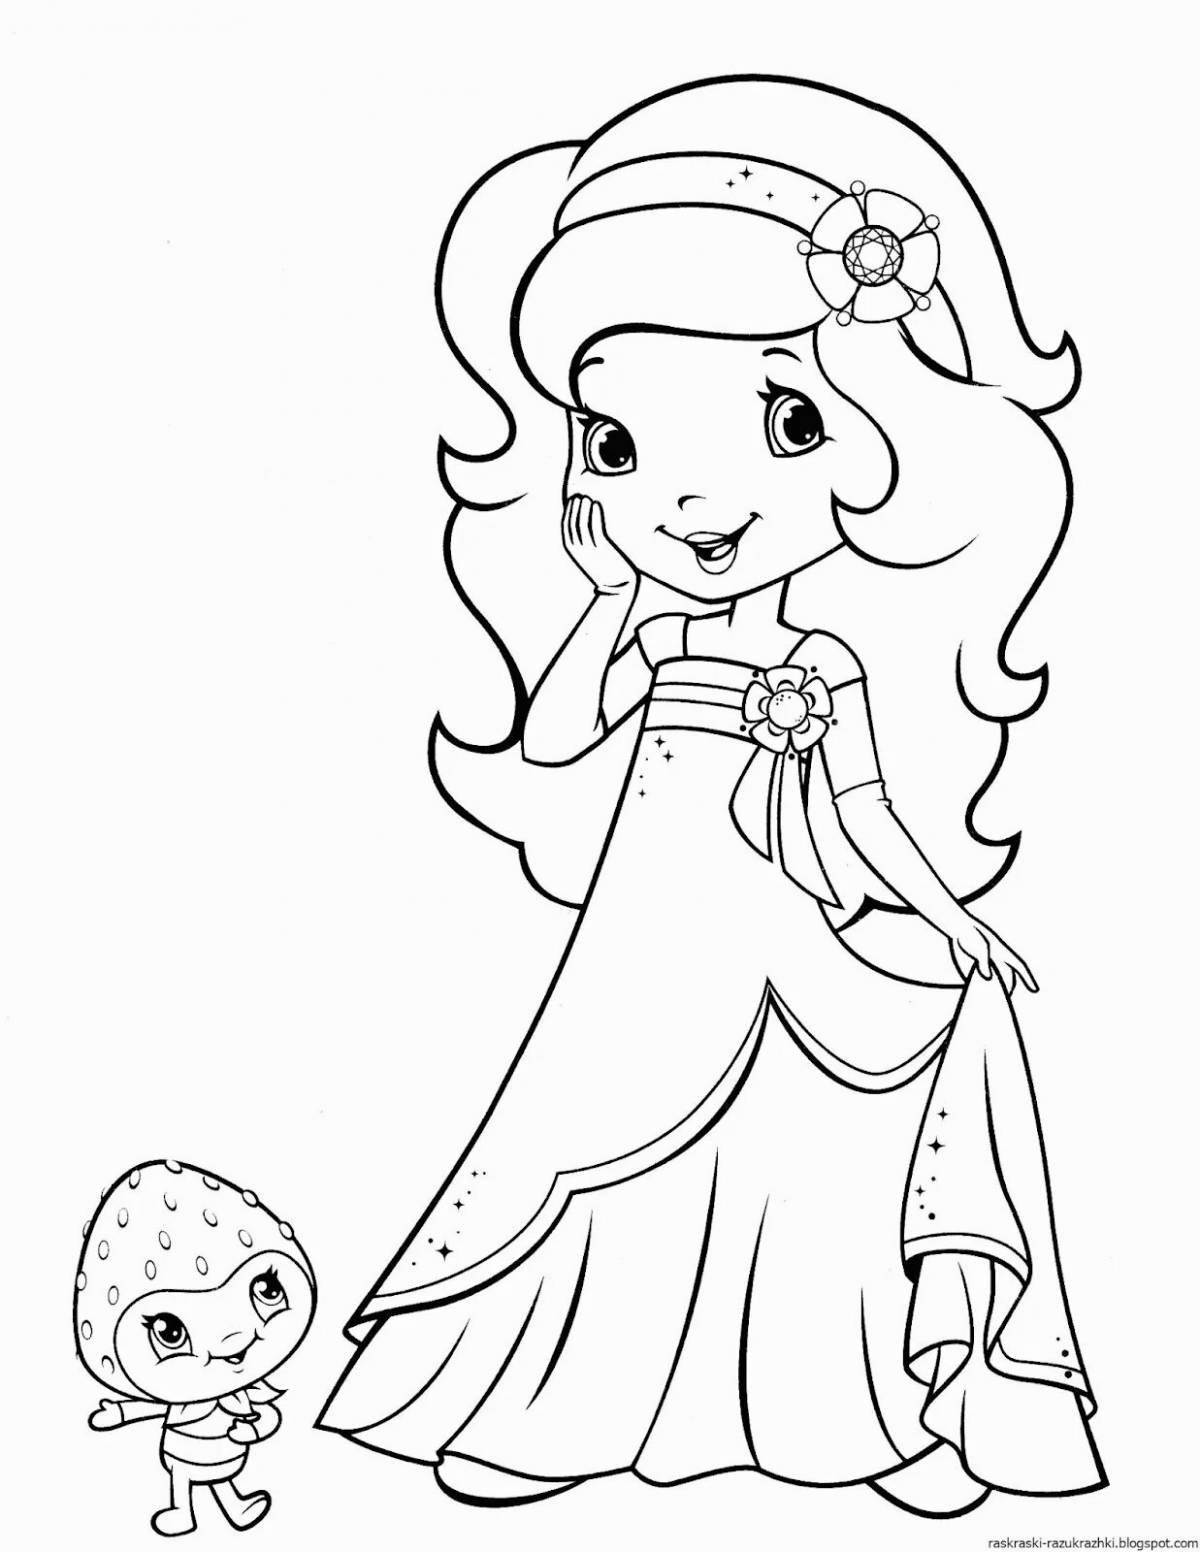 Funny princess coloring pages for girls 4-5 years old